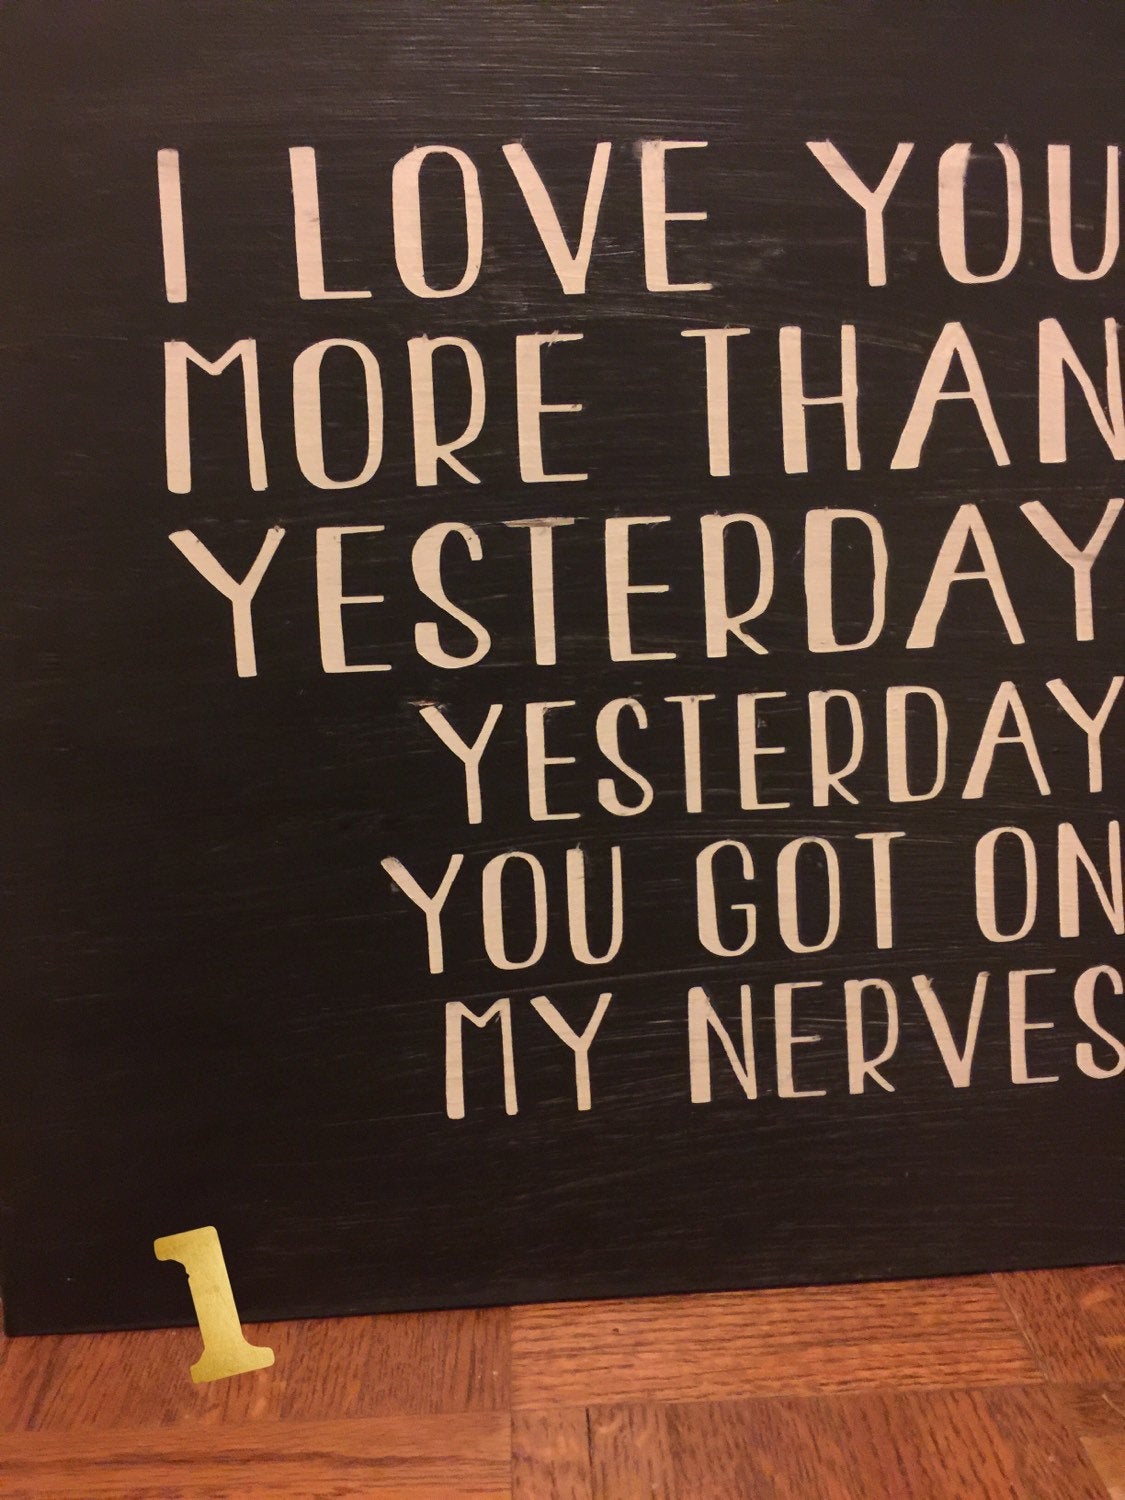 I Love You More Than Yesterday...yesterday You Got On My Nerves. Hand Painted 16x16 Wood Sign. Choice Of 2 Styles.